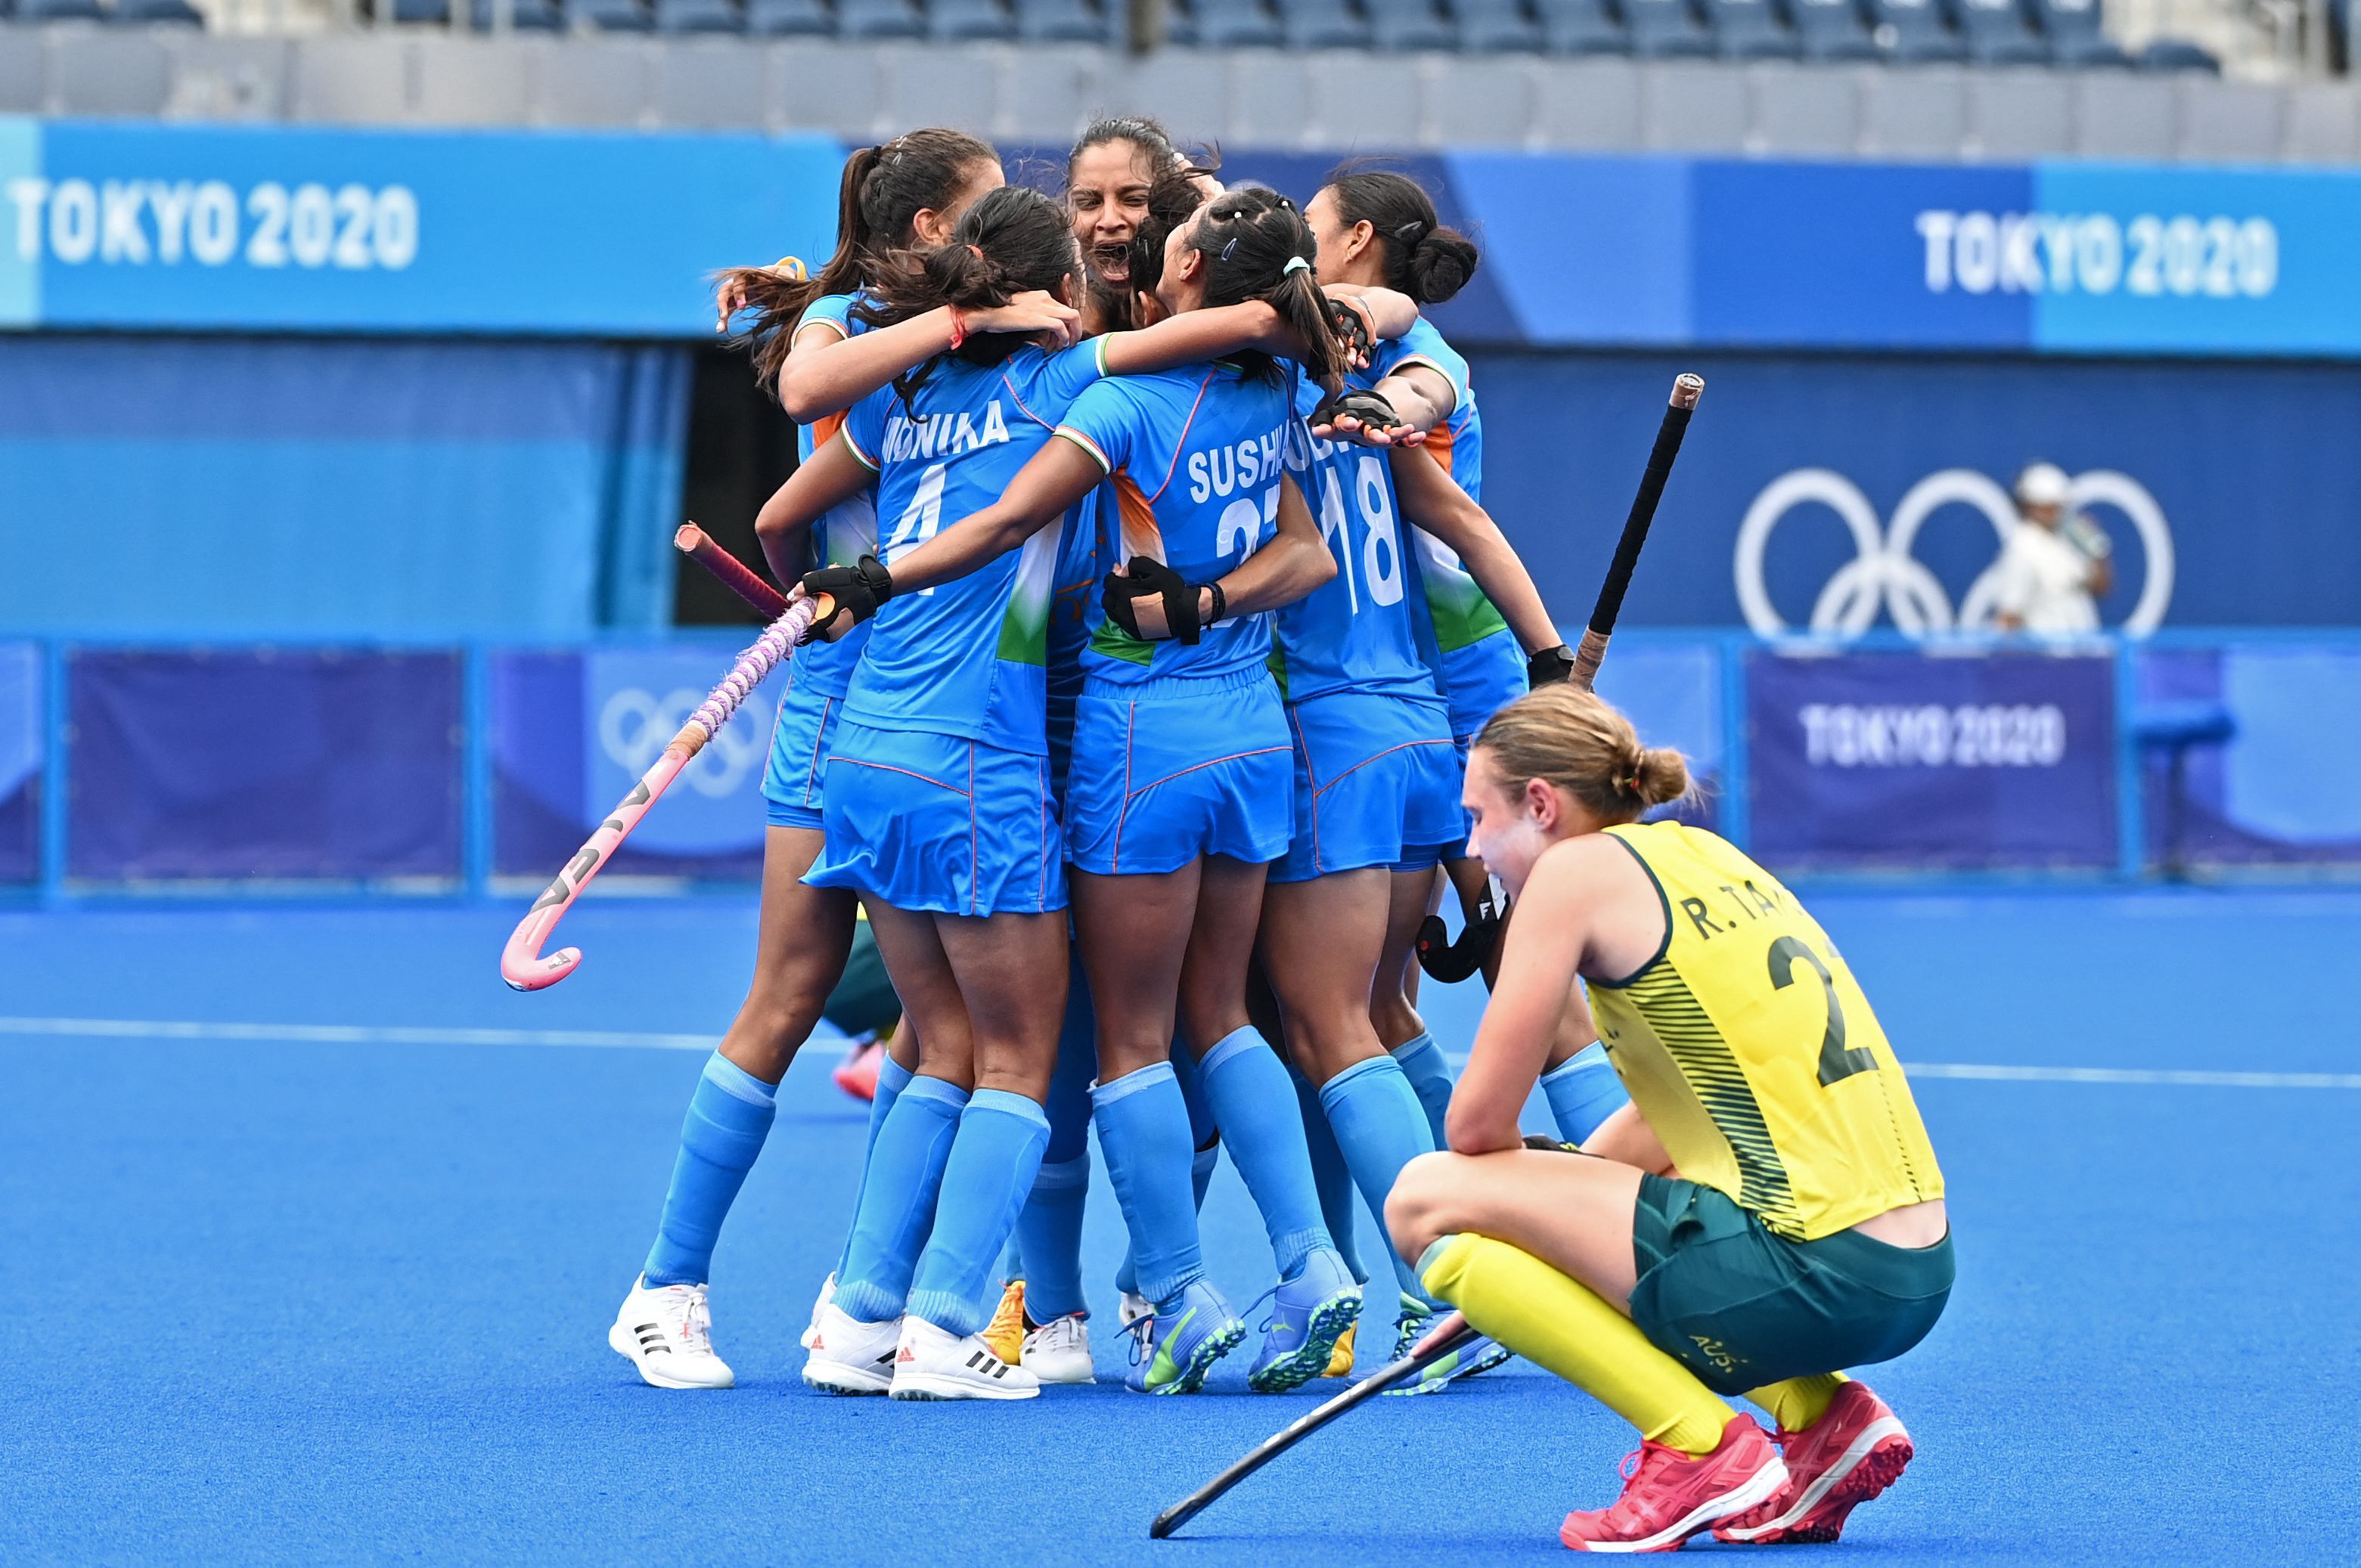 Players of India celebrate after defeating Australia 1-0 in their women's quarter-final match of the Tokyo 2020 Olympic Games field hockey competition Aug. 2